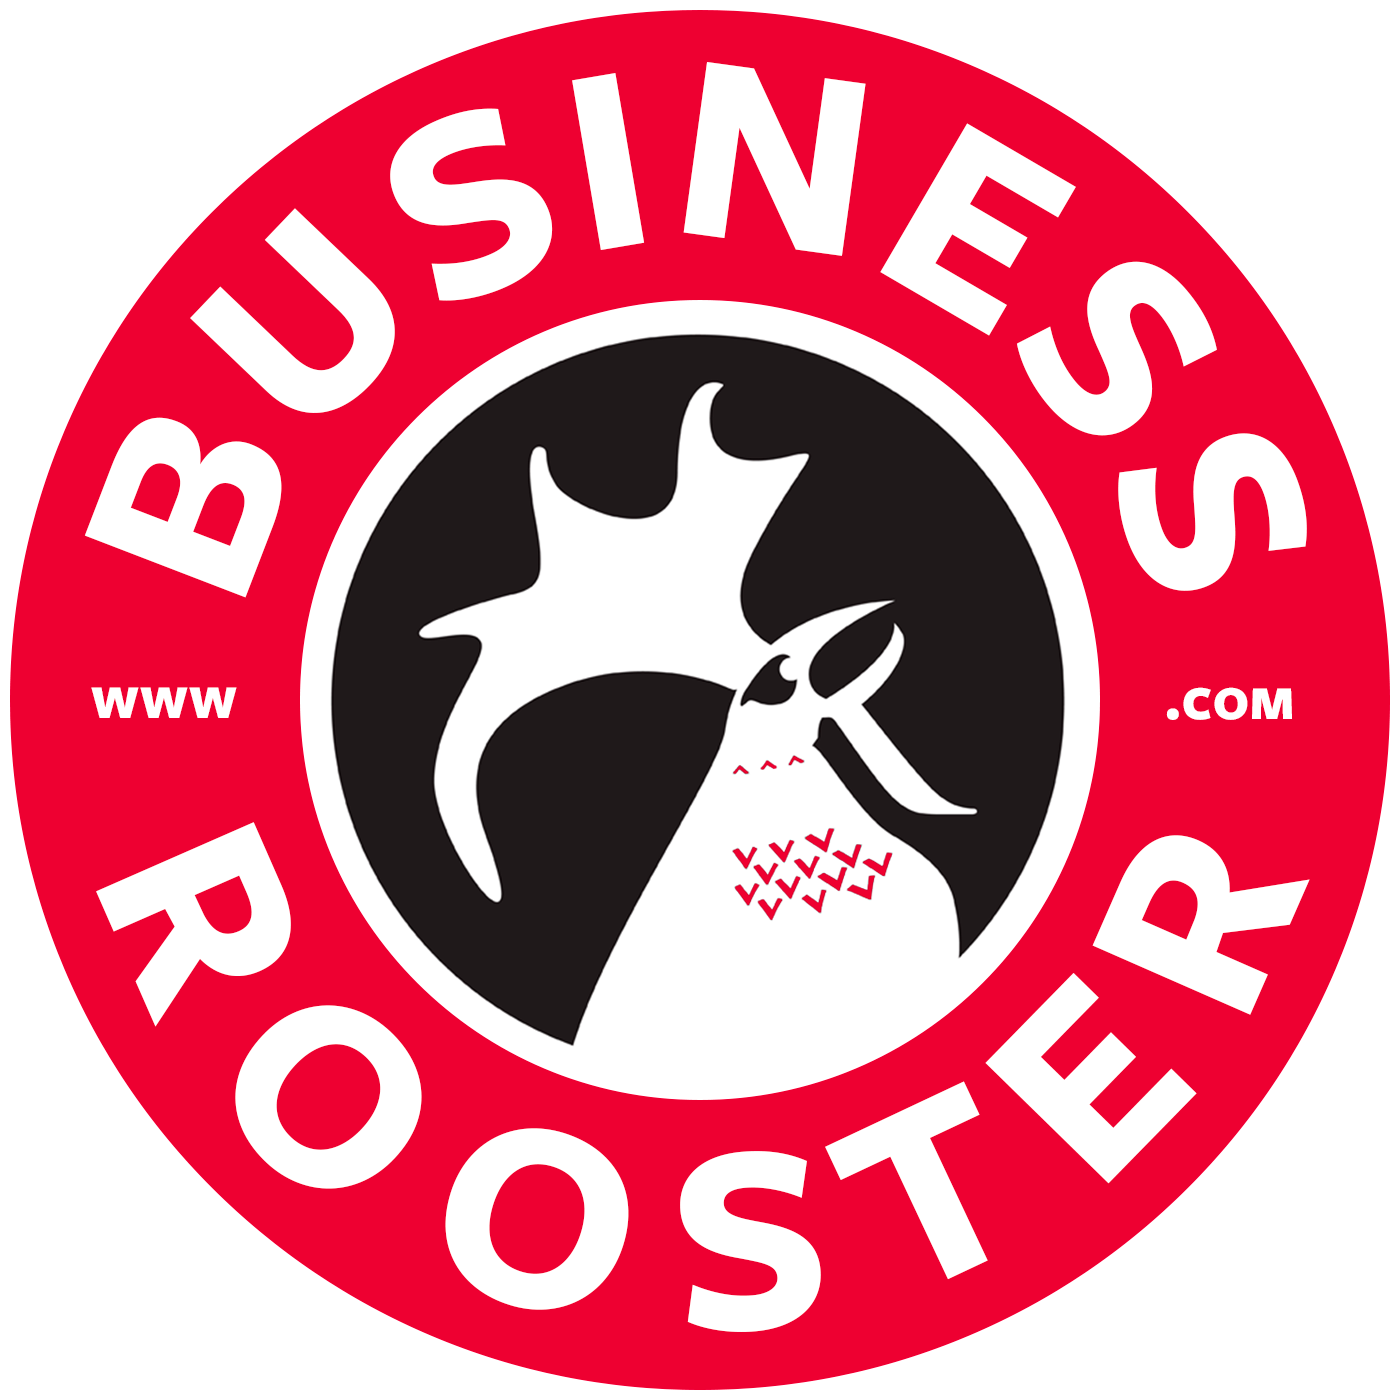 Business Rooster - Love Guns And Coffee Sticker (1400x1400)